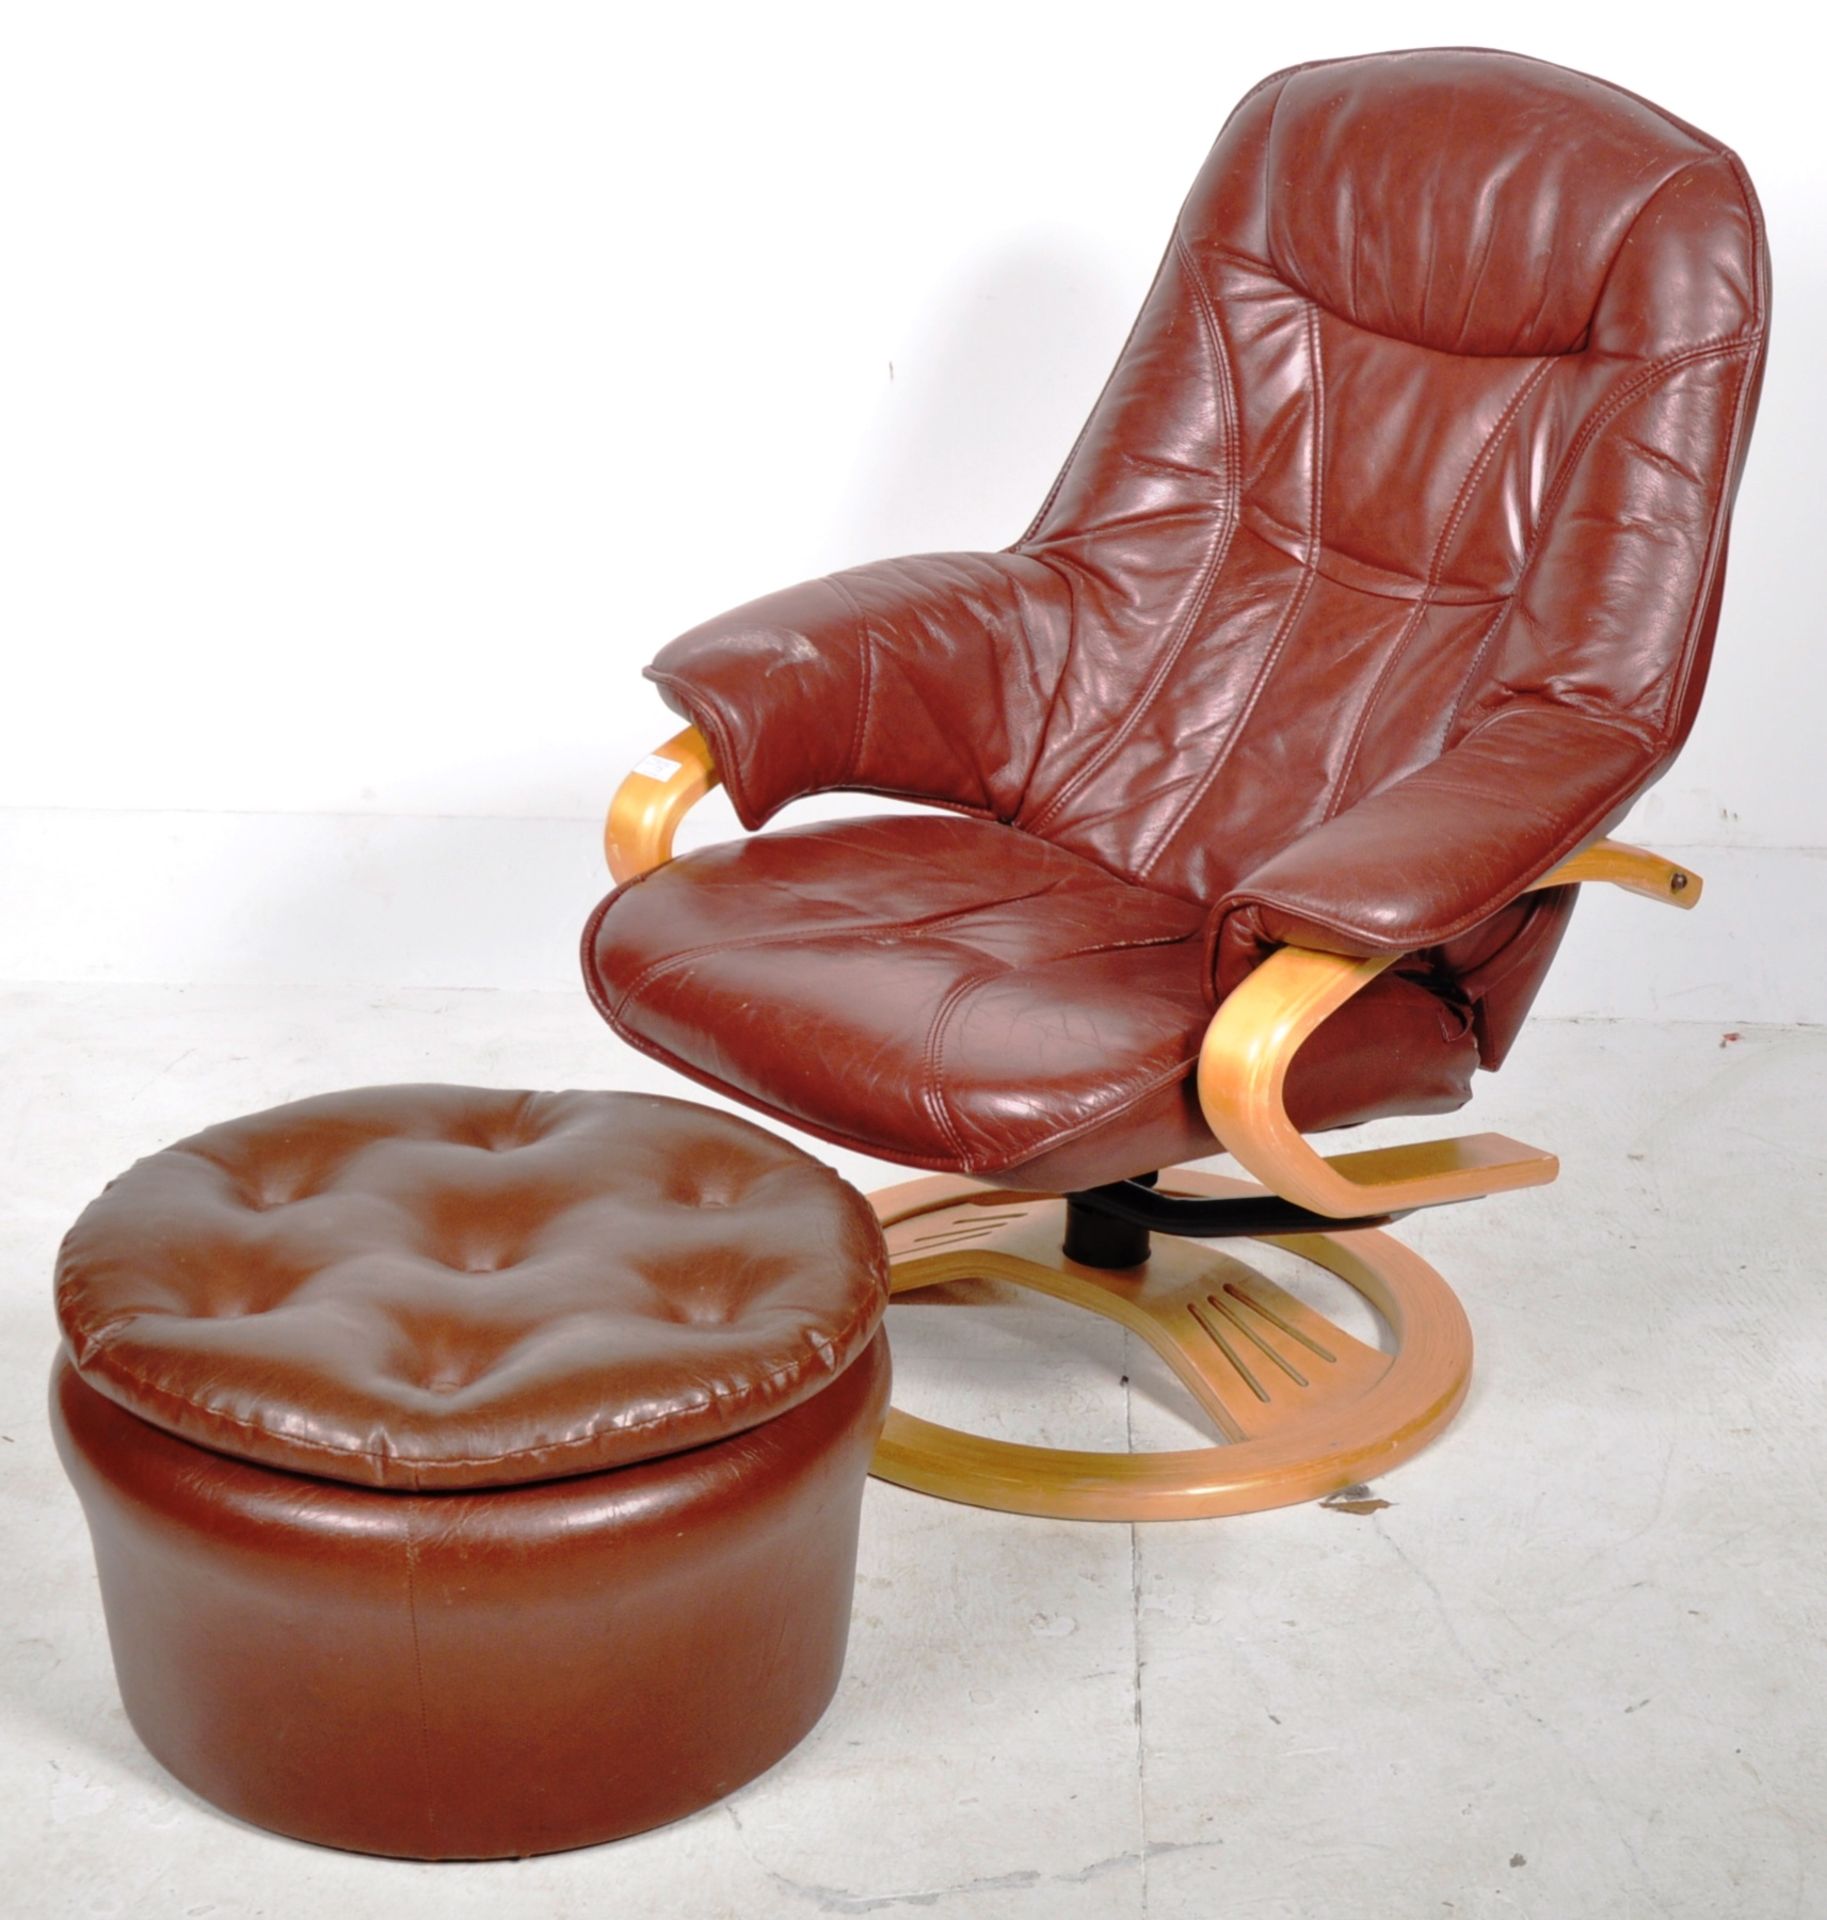 CONTEMPORARY DARK BROWN LEATHER UPHOLSTERED RECLINING CHAIR - Image 2 of 8